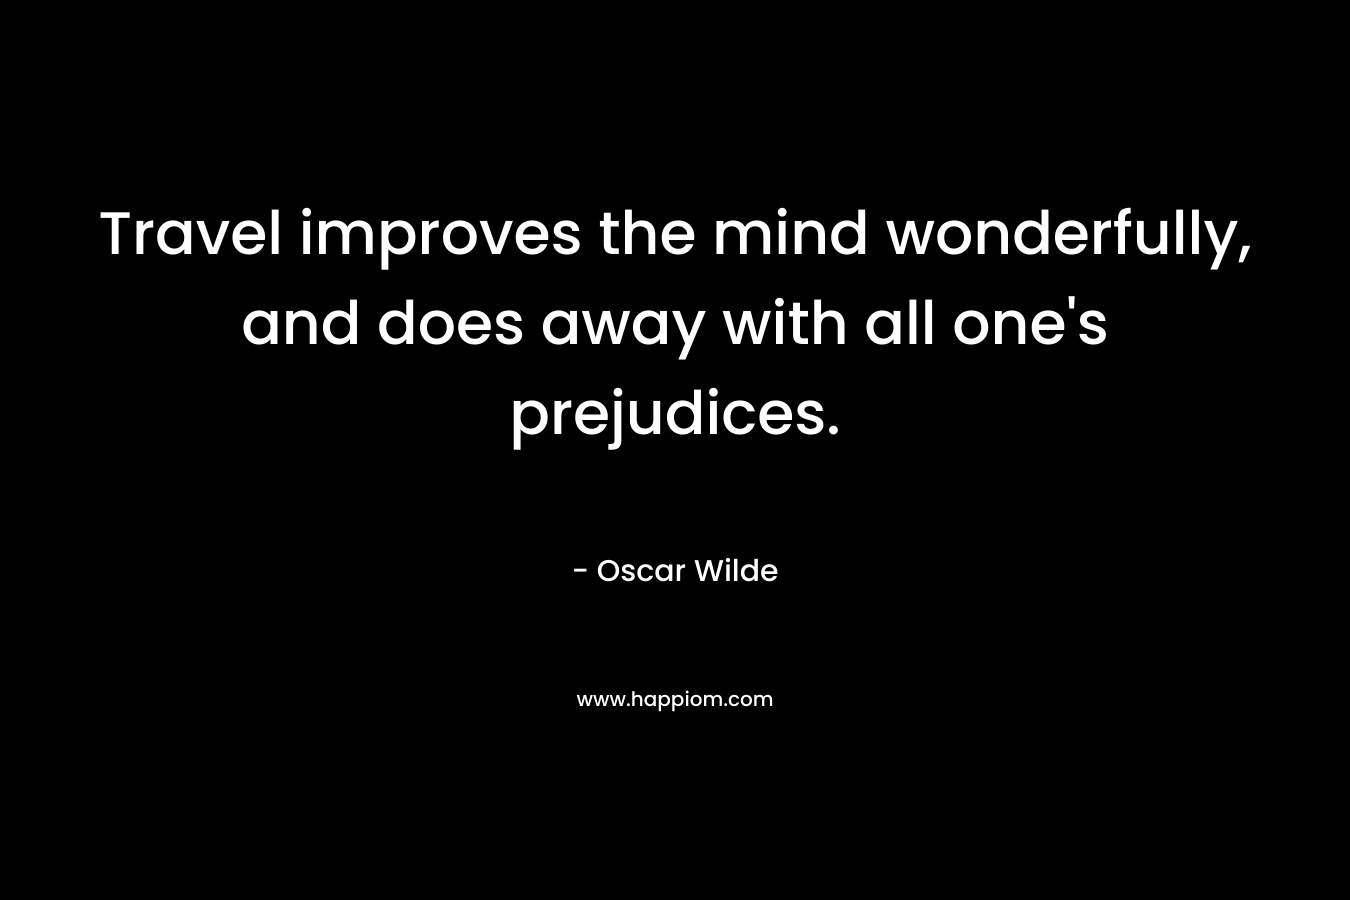 Travel improves the mind wonderfully, and does away with all one's prejudices.